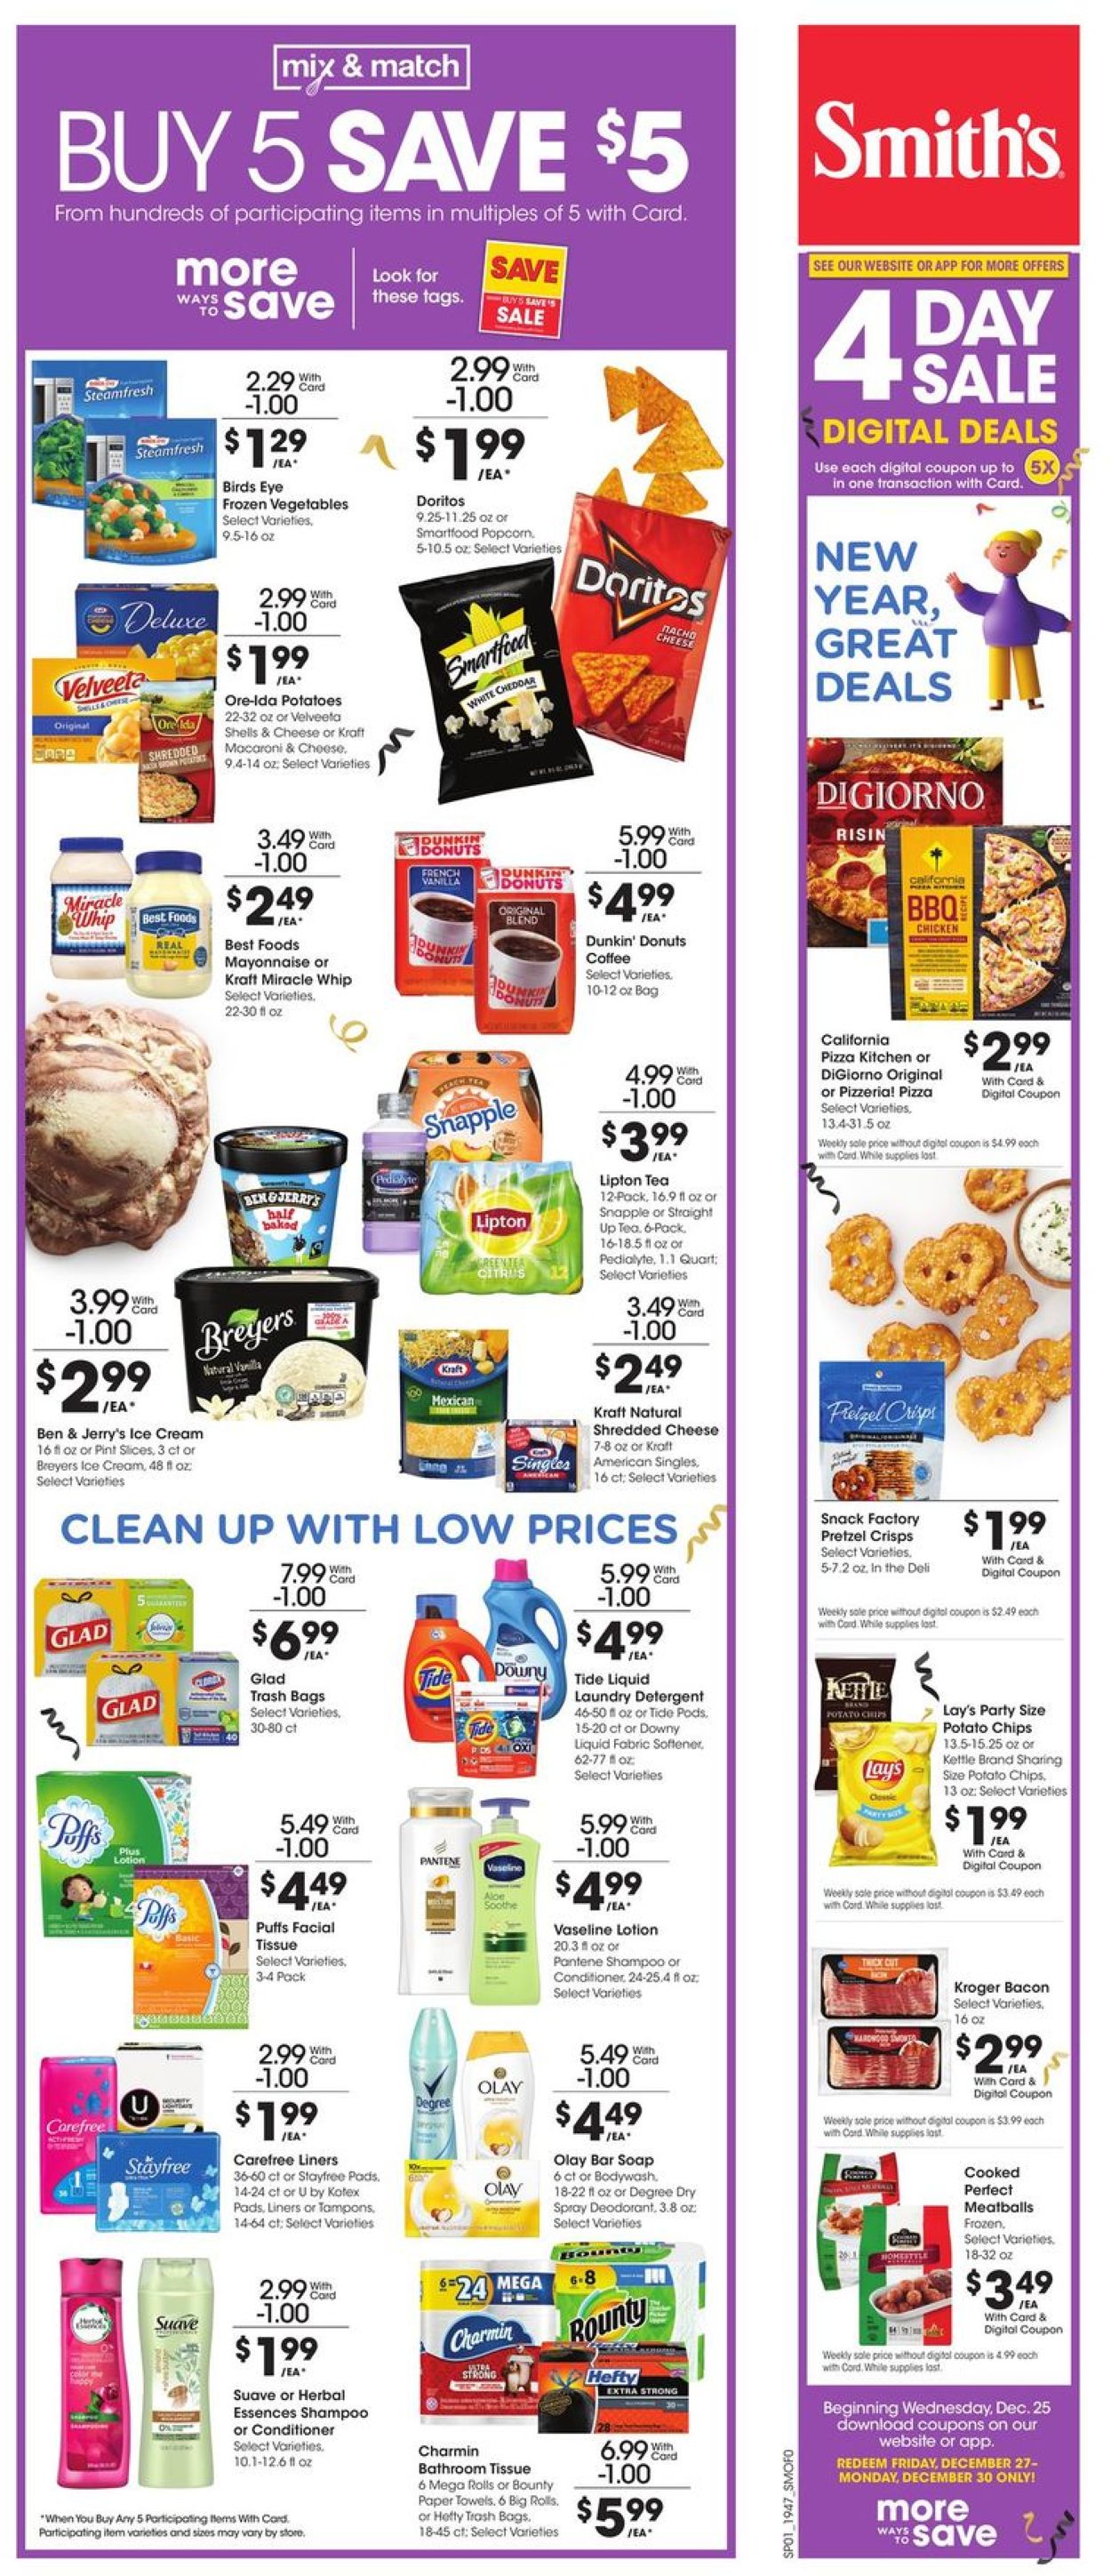 Catalogue Smith's - New Year's Ad 2019/2020 from 12/26/2019